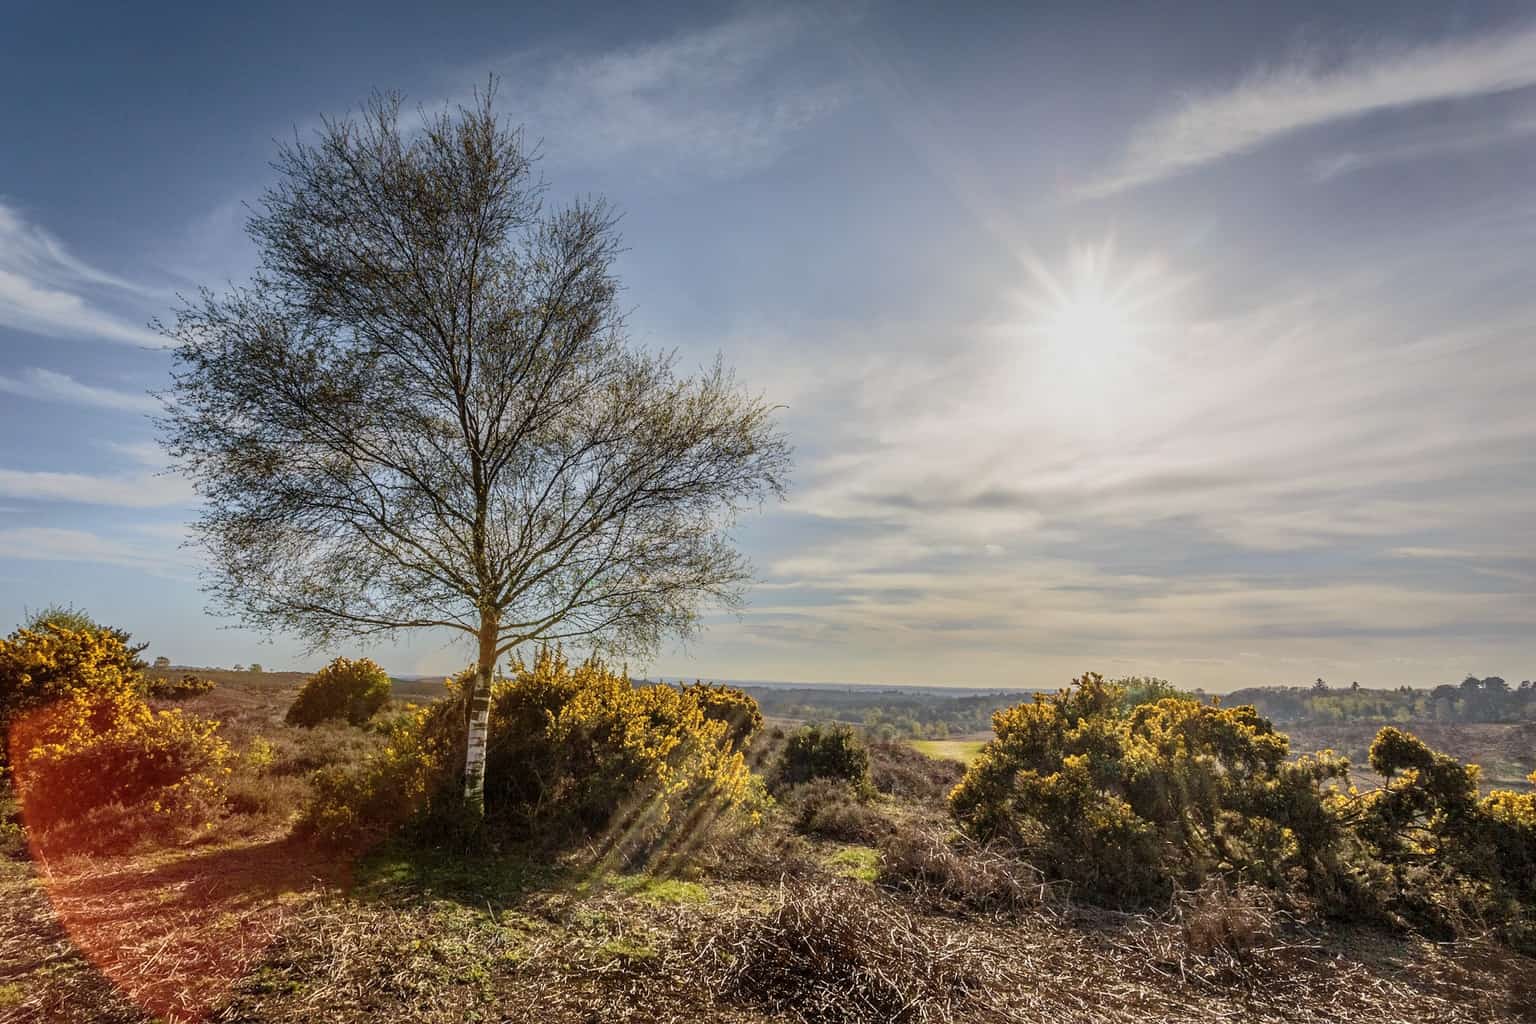  Landscape photography in Hampshire by Rick McEvoy 